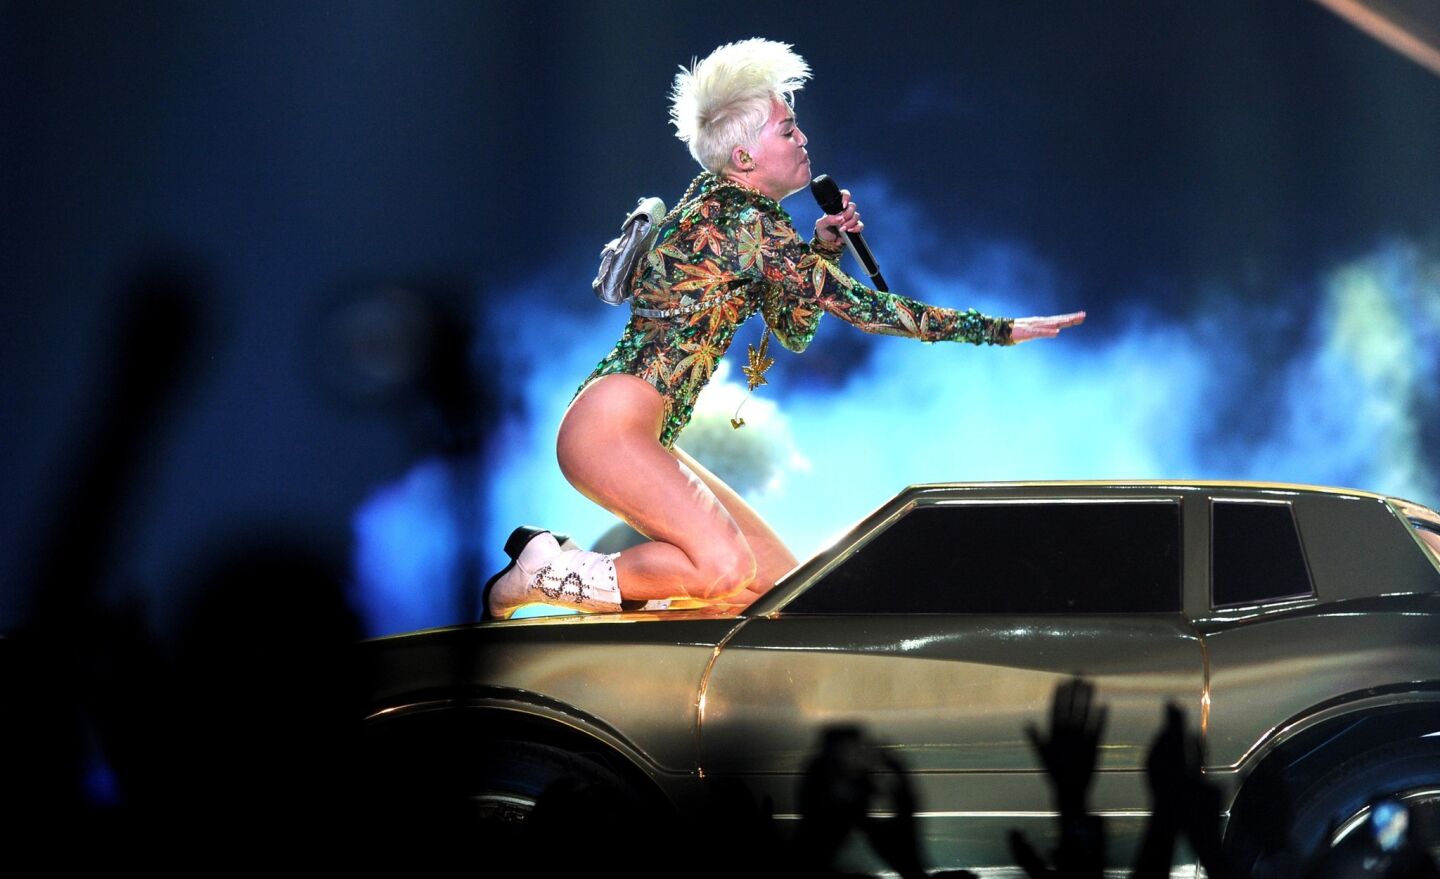 With a swing, Miley Cyrus' hair gives off a Mohawk effect.